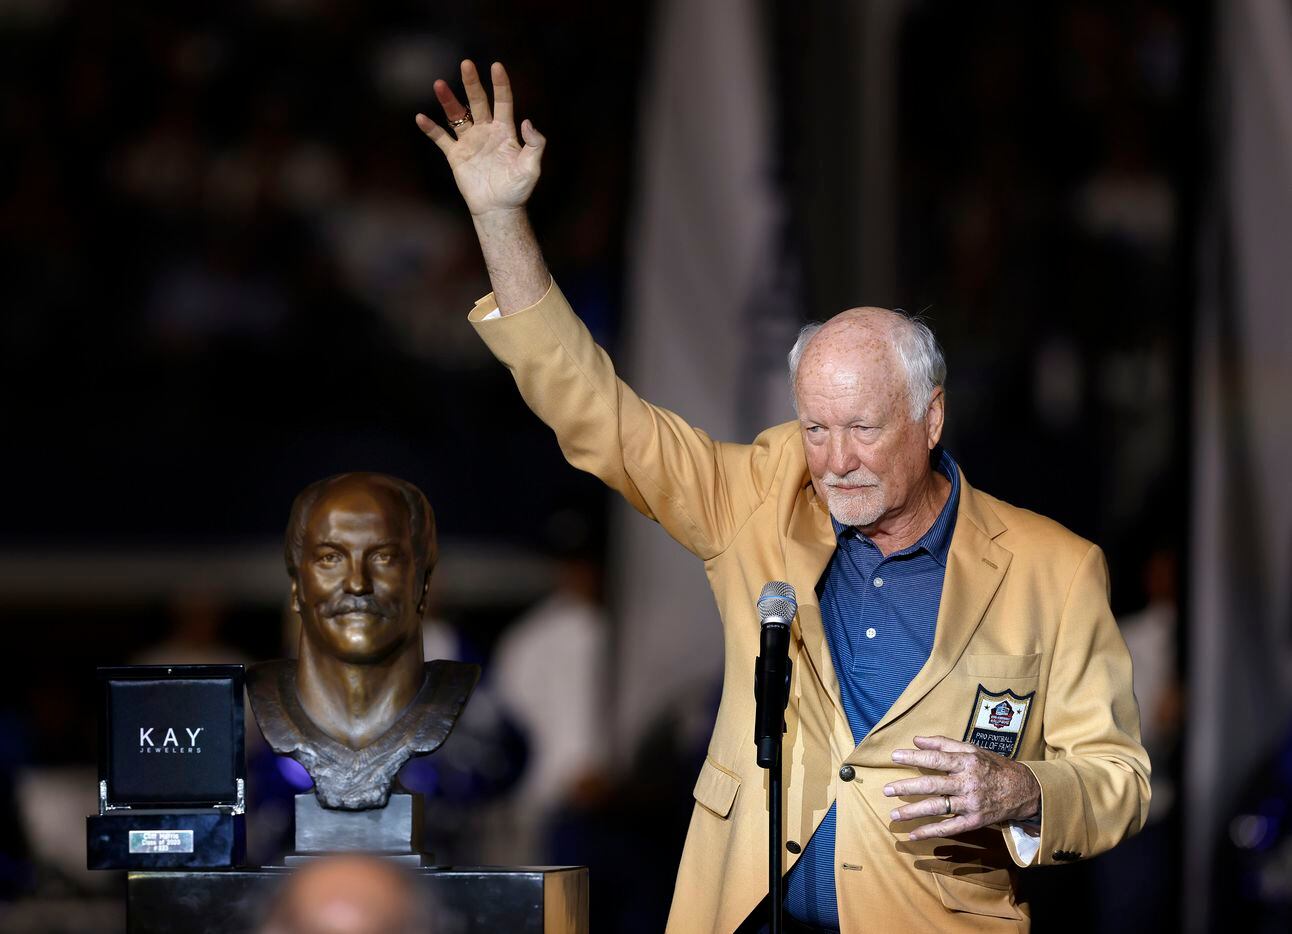 Dallas Cowboys Pro Football Hall of Famer Cliff Harris waves to the crowd following his Hall ring ceremony speech during halftime of the Philadelphia Eagles game at AT&T Stadium in Arlington, Monday, September 27, 2021. (Tom Fox/The Dallas Morning News)